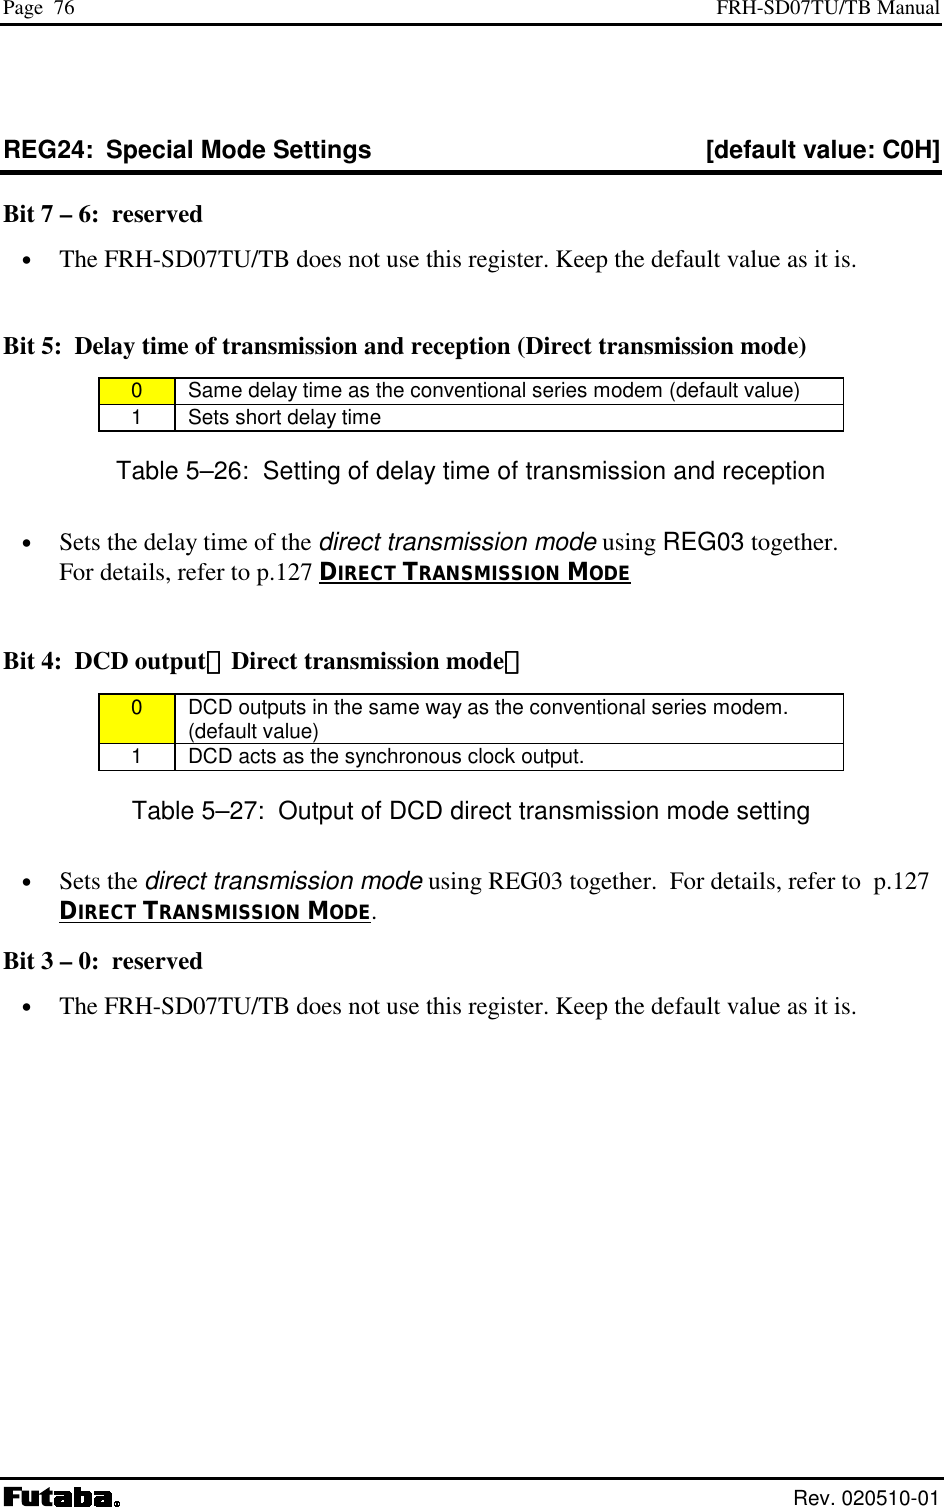 Page  76  FRH-SD07TU/TB Manual  Rev. 020510-01 REG24:  Special Mode Settings  [default value: C0H] Bit 7 – 6:  reserved •  The FRH-SD07TU/TB does not use this register. Keep the default value as it is.  Bit 5:  Delay time of transmission and reception (Direct transmission mode) 0   Same delay time as the conventional series modem (default value) 1   Sets short delay time Table 5–26:  Setting of delay time of transmission and reception  •  Sets the delay time of the direct transmission mode using REG03 together. For details, refer to p.127 DIRECT TRANSMISSION MODE  Bit 4:  DCD output（（（（Direct transmission mode）））） 0   DCD outputs in the same way as the conventional series modem. (default value) 1   DCD acts as the synchronous clock output. Table 5–27:  Output of DCD direct transmission mode setting •  Sets the direct transmission mode using REG03 together.  For details, refer to  p.127 DIRECT TRANSMISSION MODE. Bit 3 – 0:  reserved •  The FRH-SD07TU/TB does not use this register. Keep the default value as it is. 